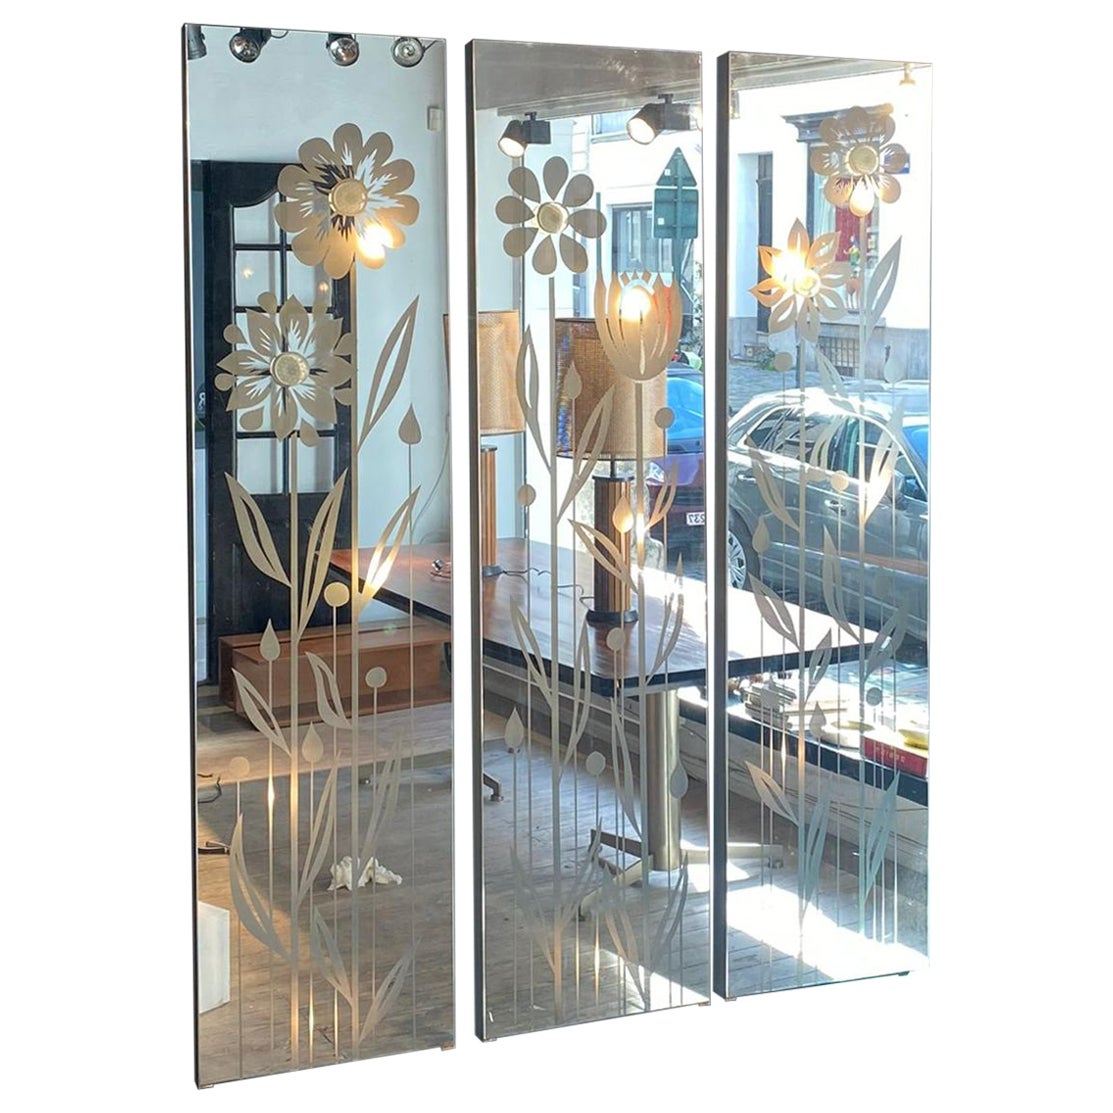 Backlit mirrored panels with coat hangers For Sale